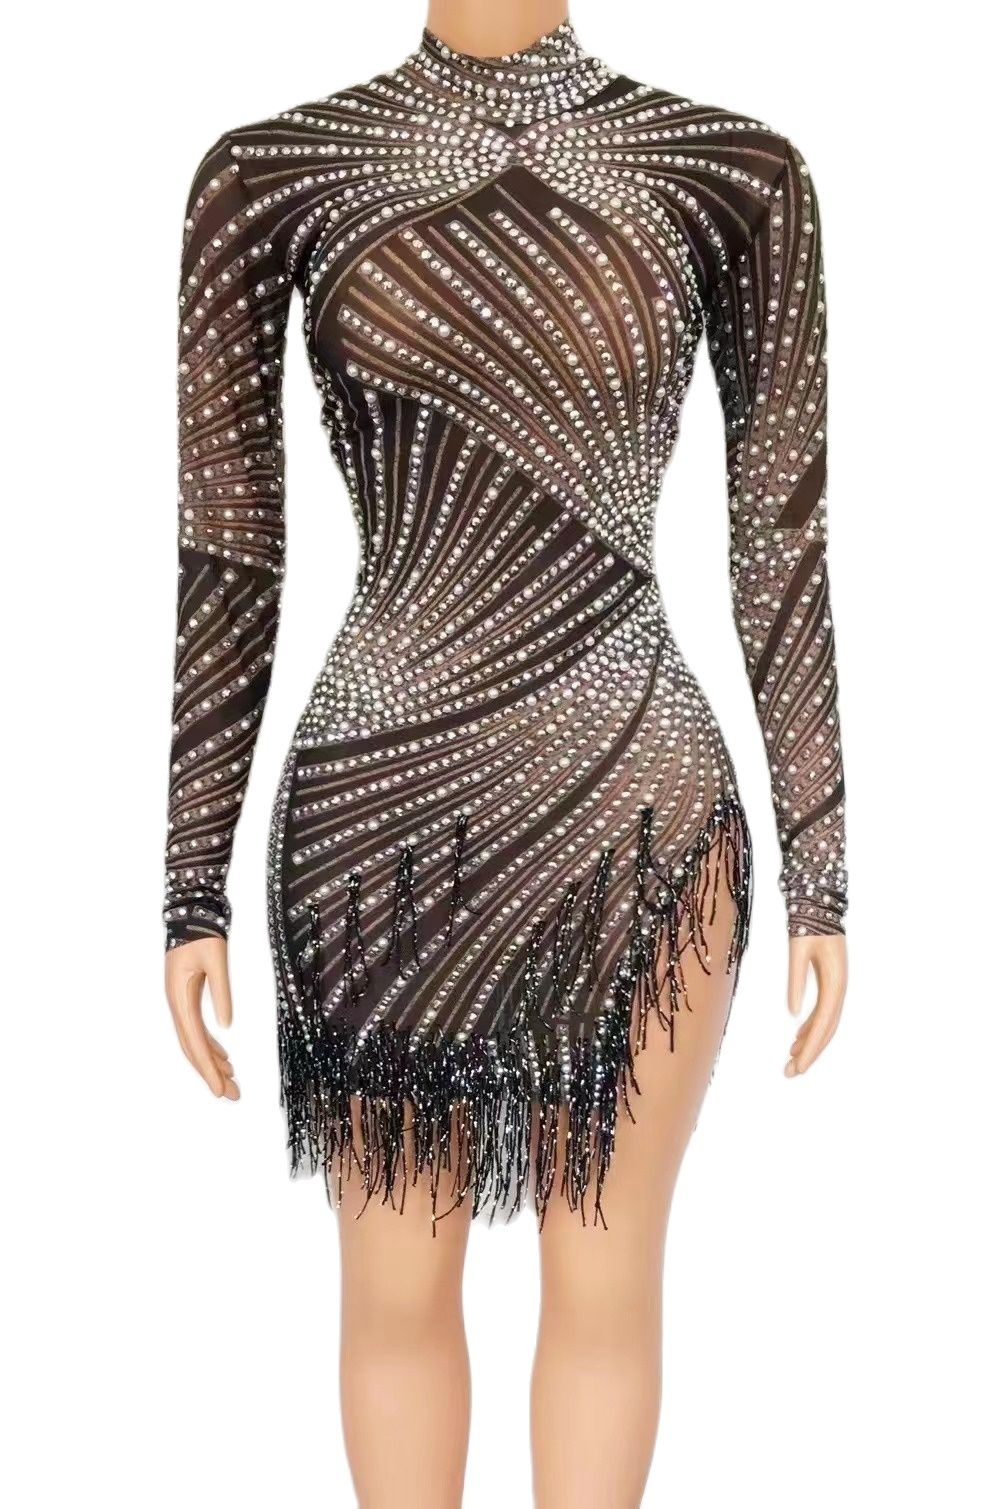 Sexy Stage Pearls Fringes See Through Tassel Dress Evening Birthday C